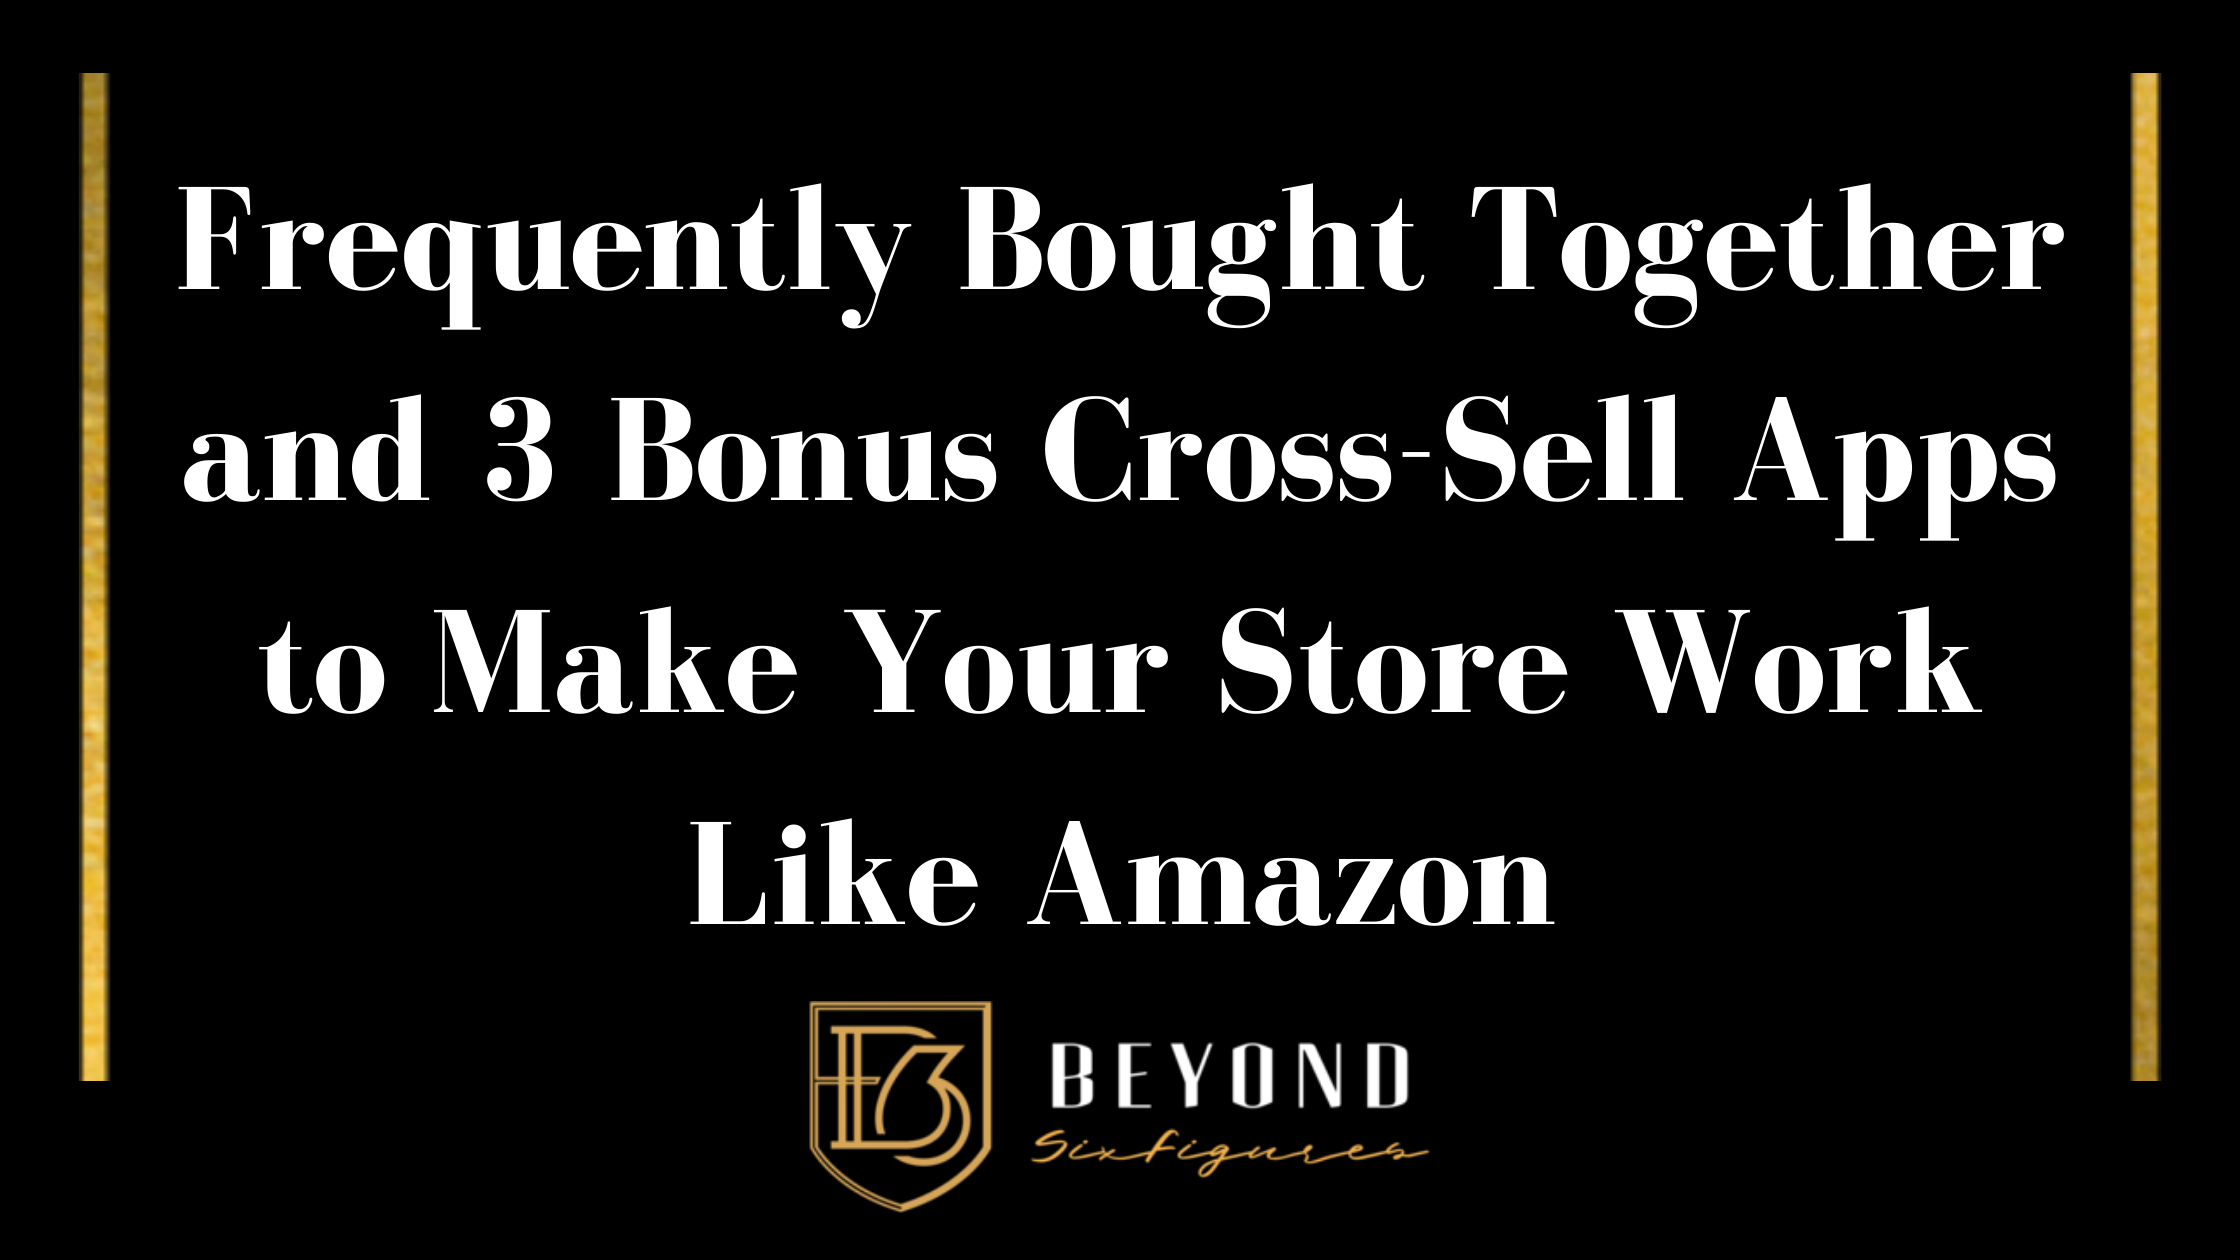 Frequently Bought Together and 3 Bonus Cross-Sell Apps to Make Your Store Work Like Amazon Blog Banner